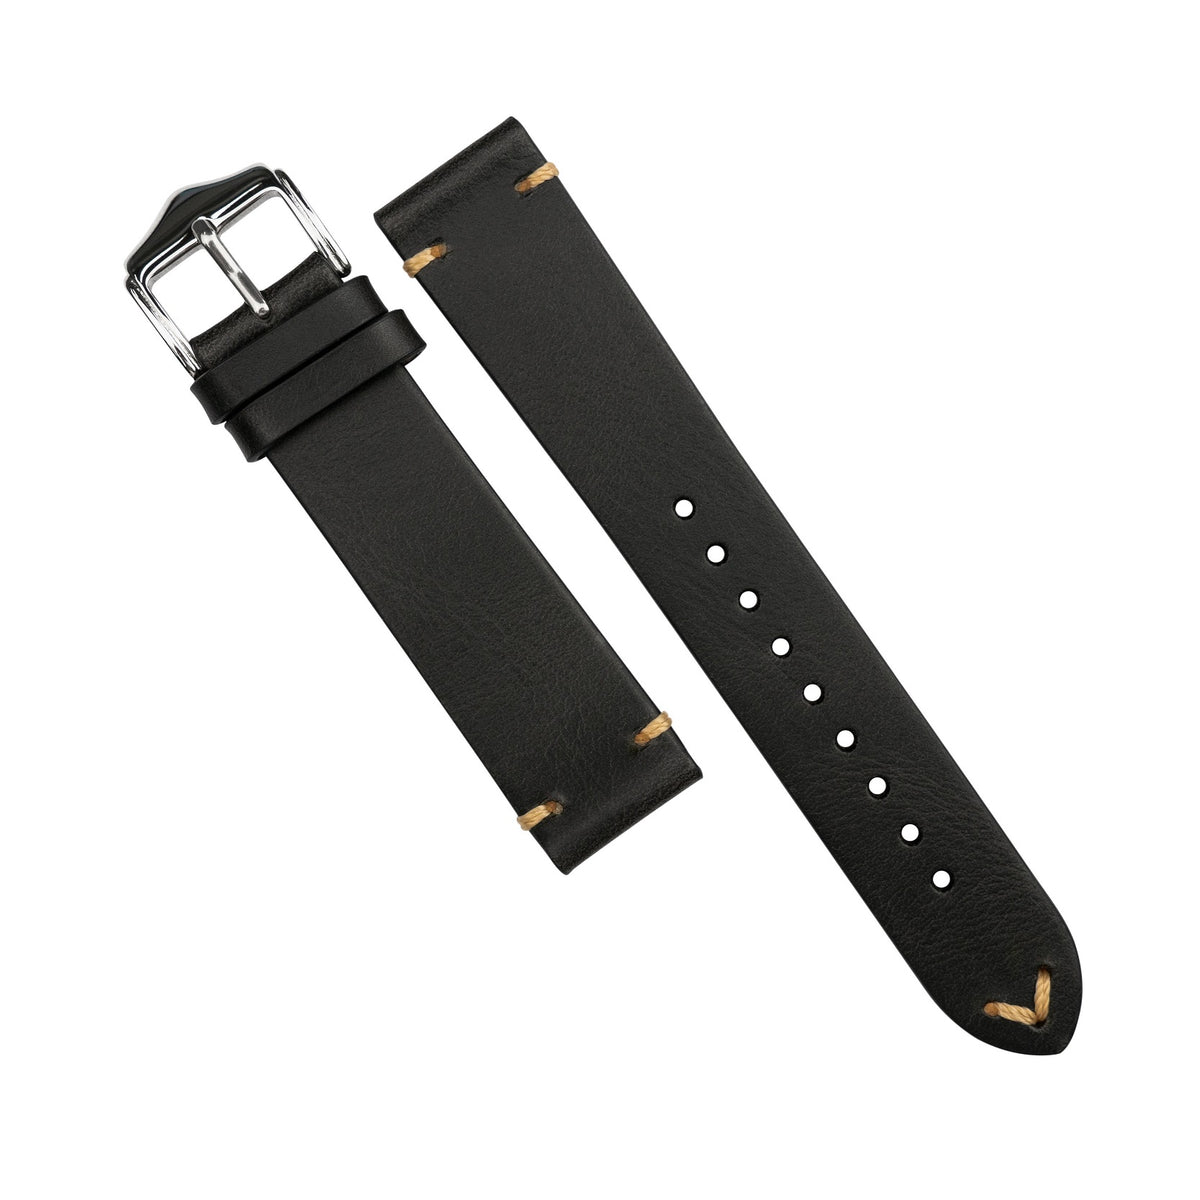 Premium Vintage Oil Waxed Leather Watch Strap in Black (18mm) - Nomad Watch Works SG